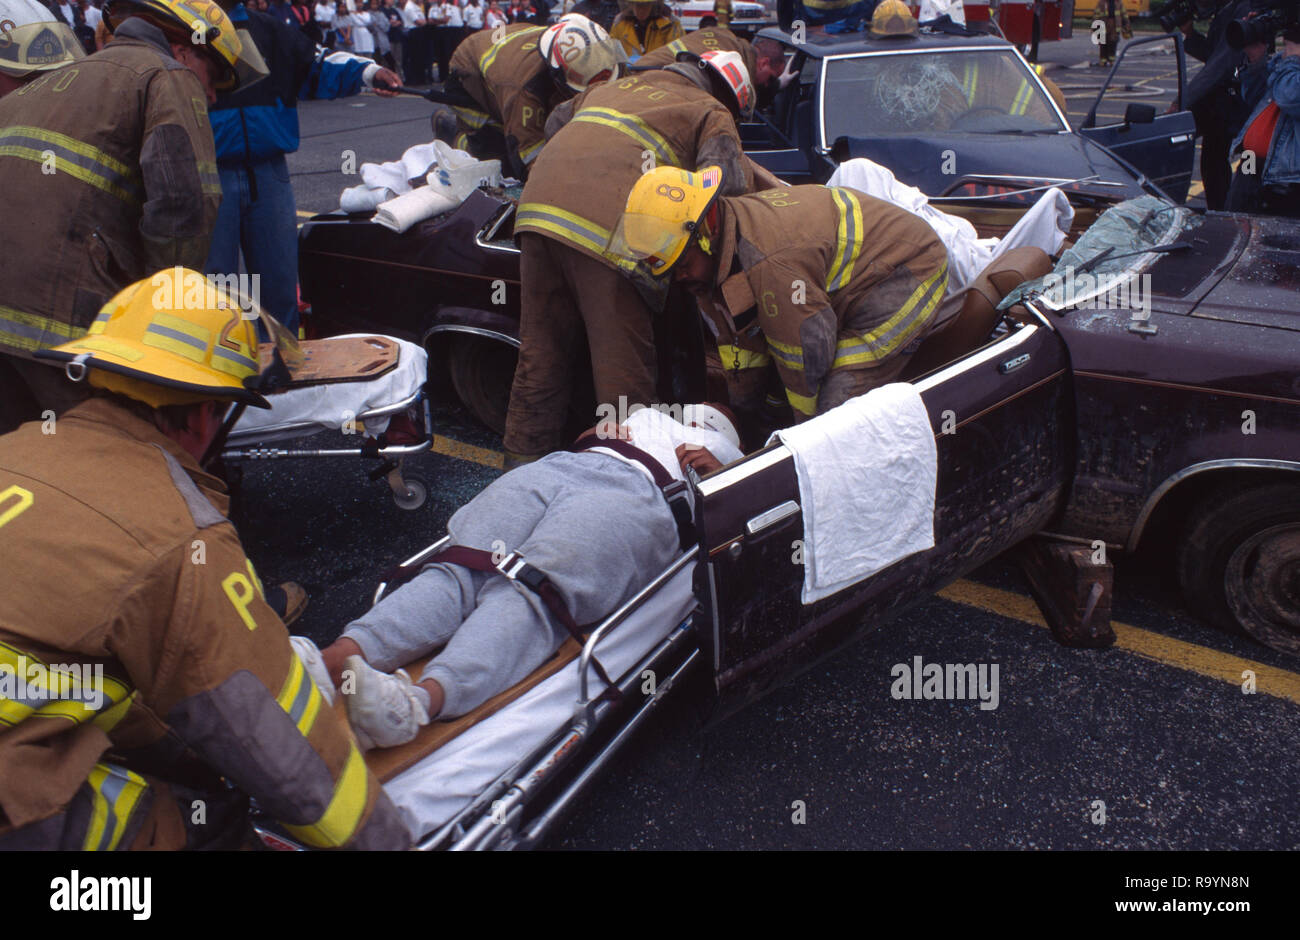 firefighters remove an injured person r esult of an auto accident Stock Photo